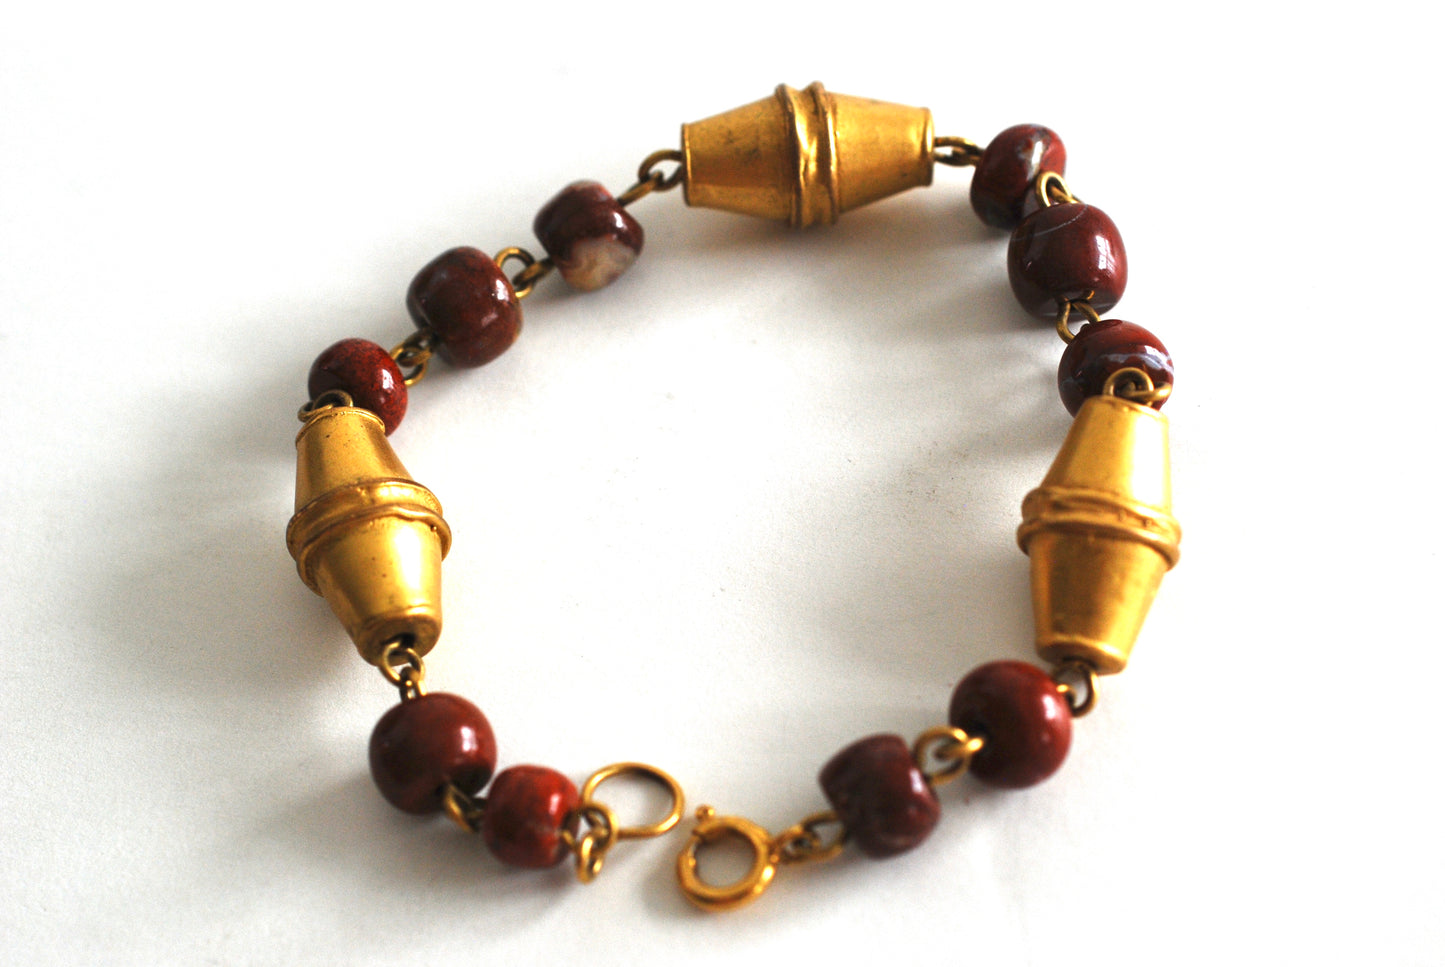 Victorian Agate and Pinchbeck Bracelet